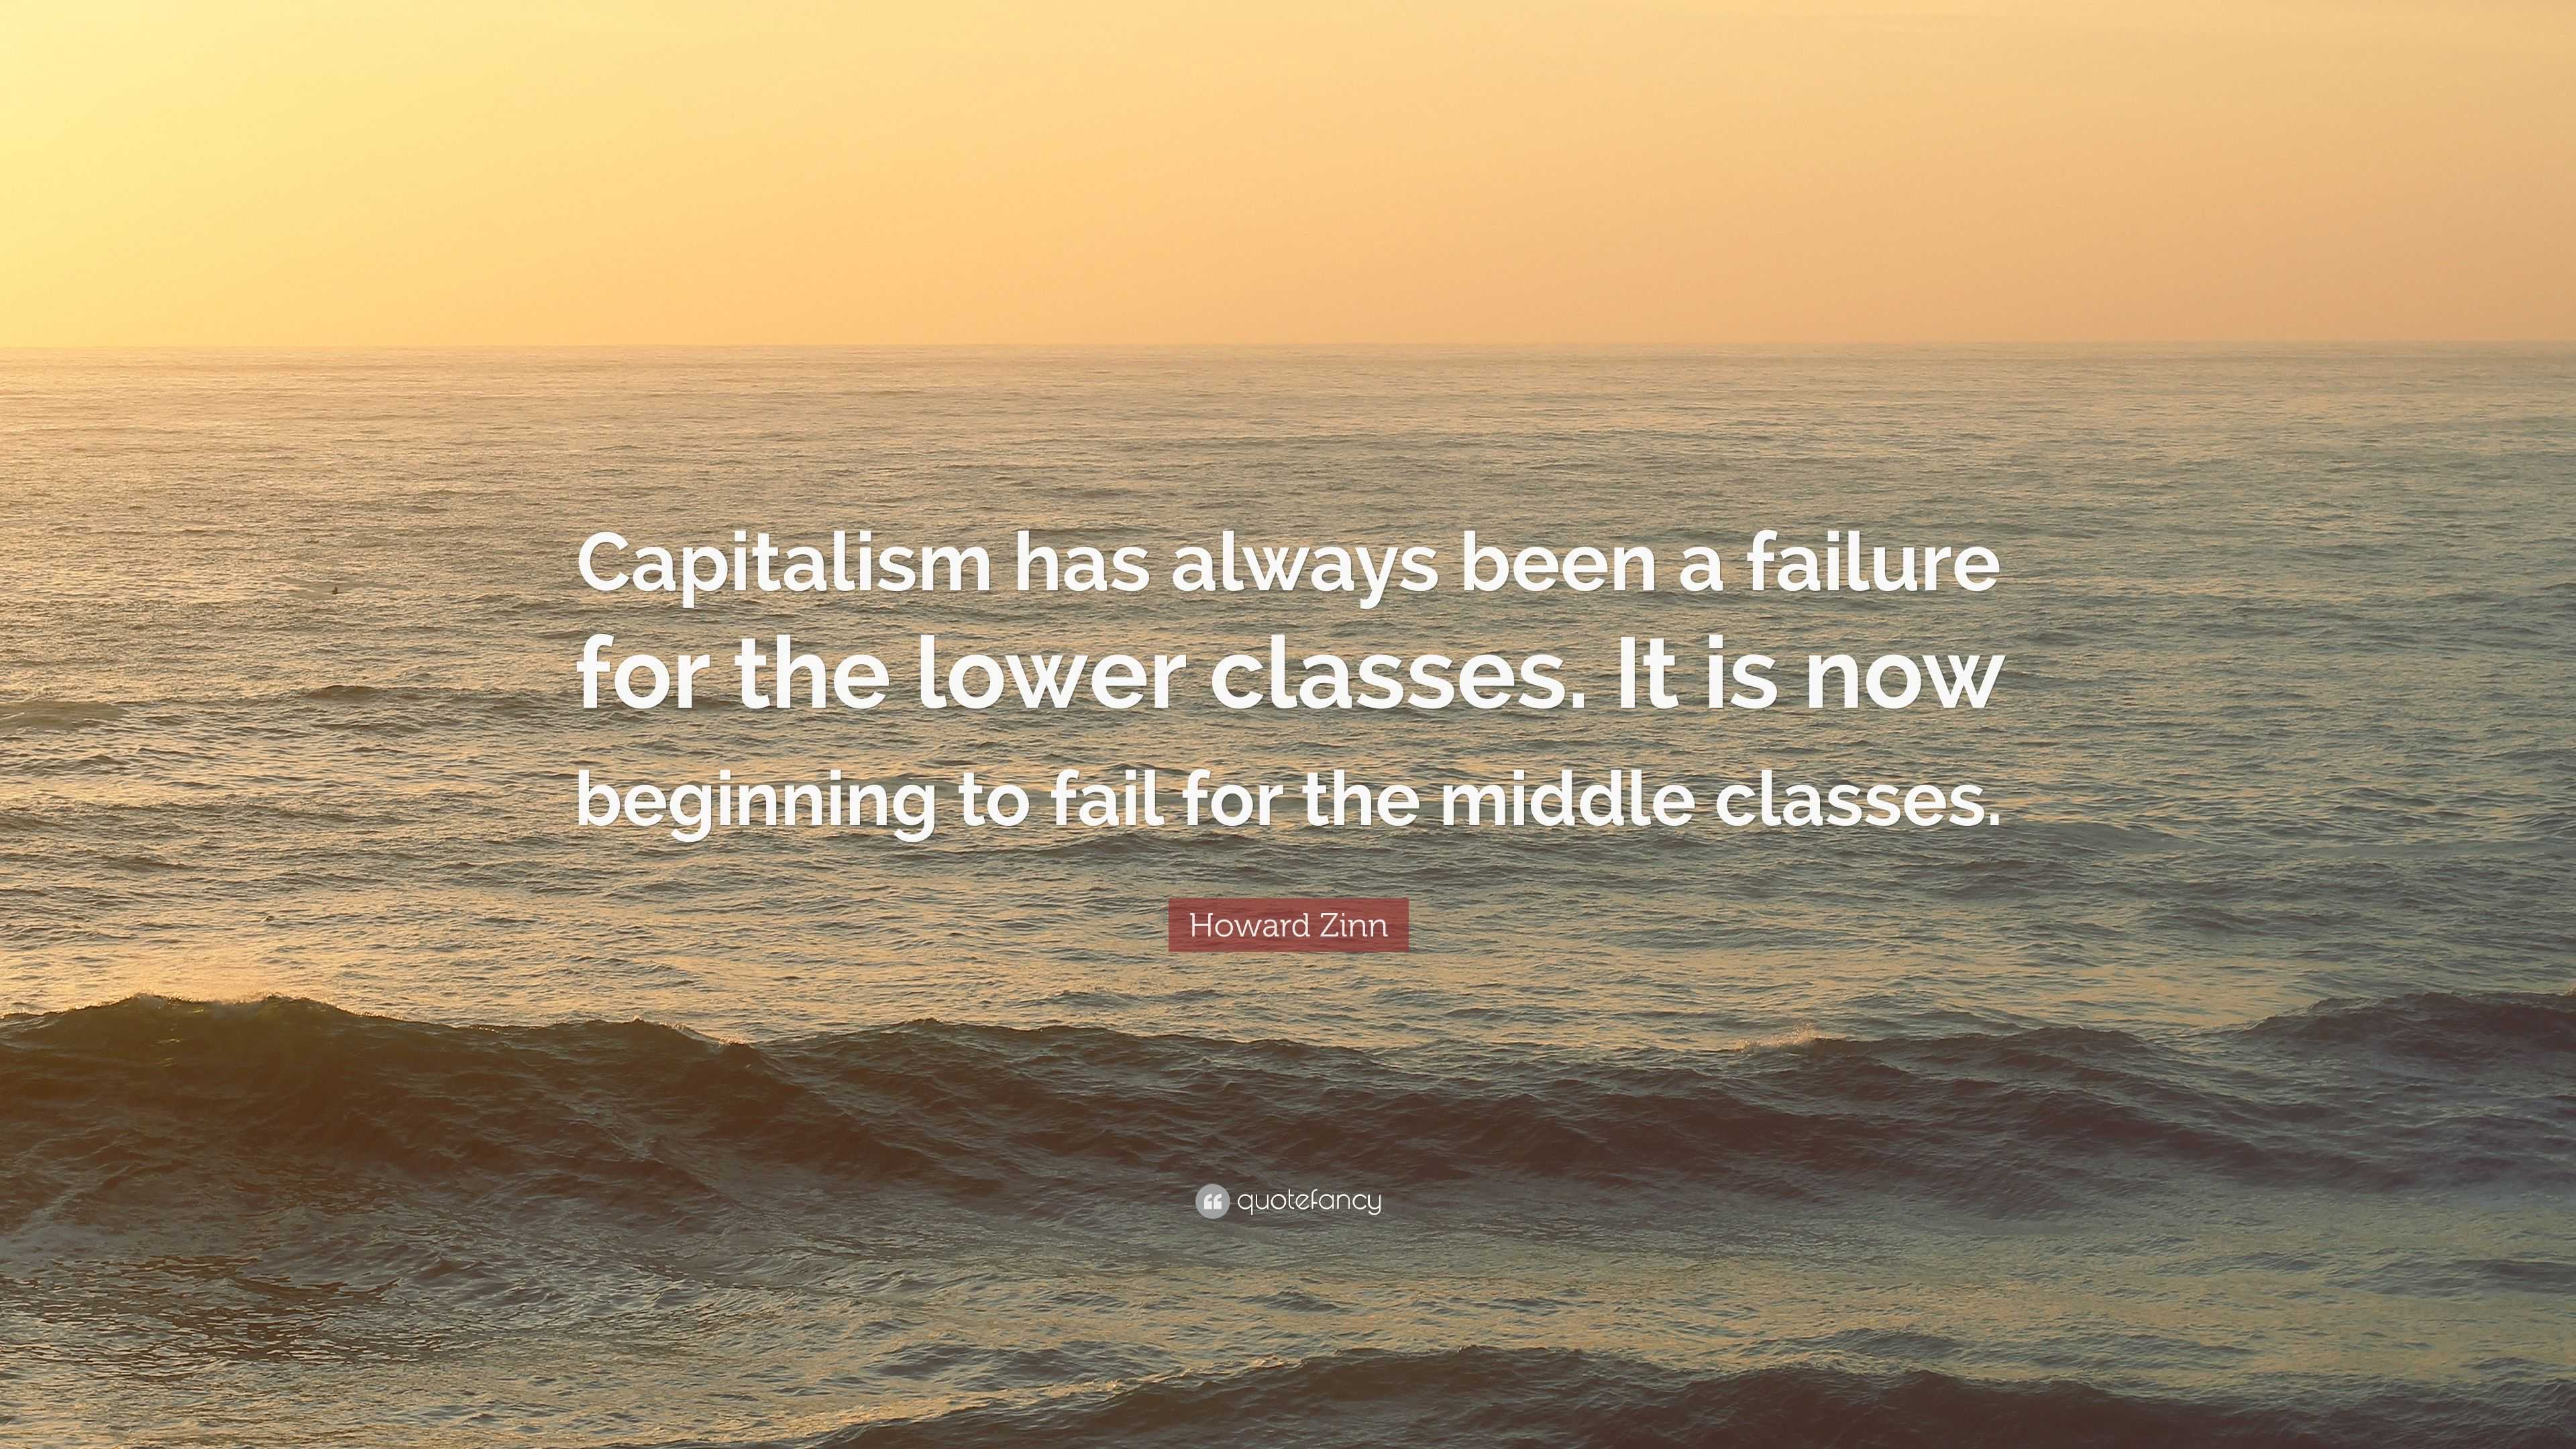 A Failure of Capitalism by Richard A. Posner